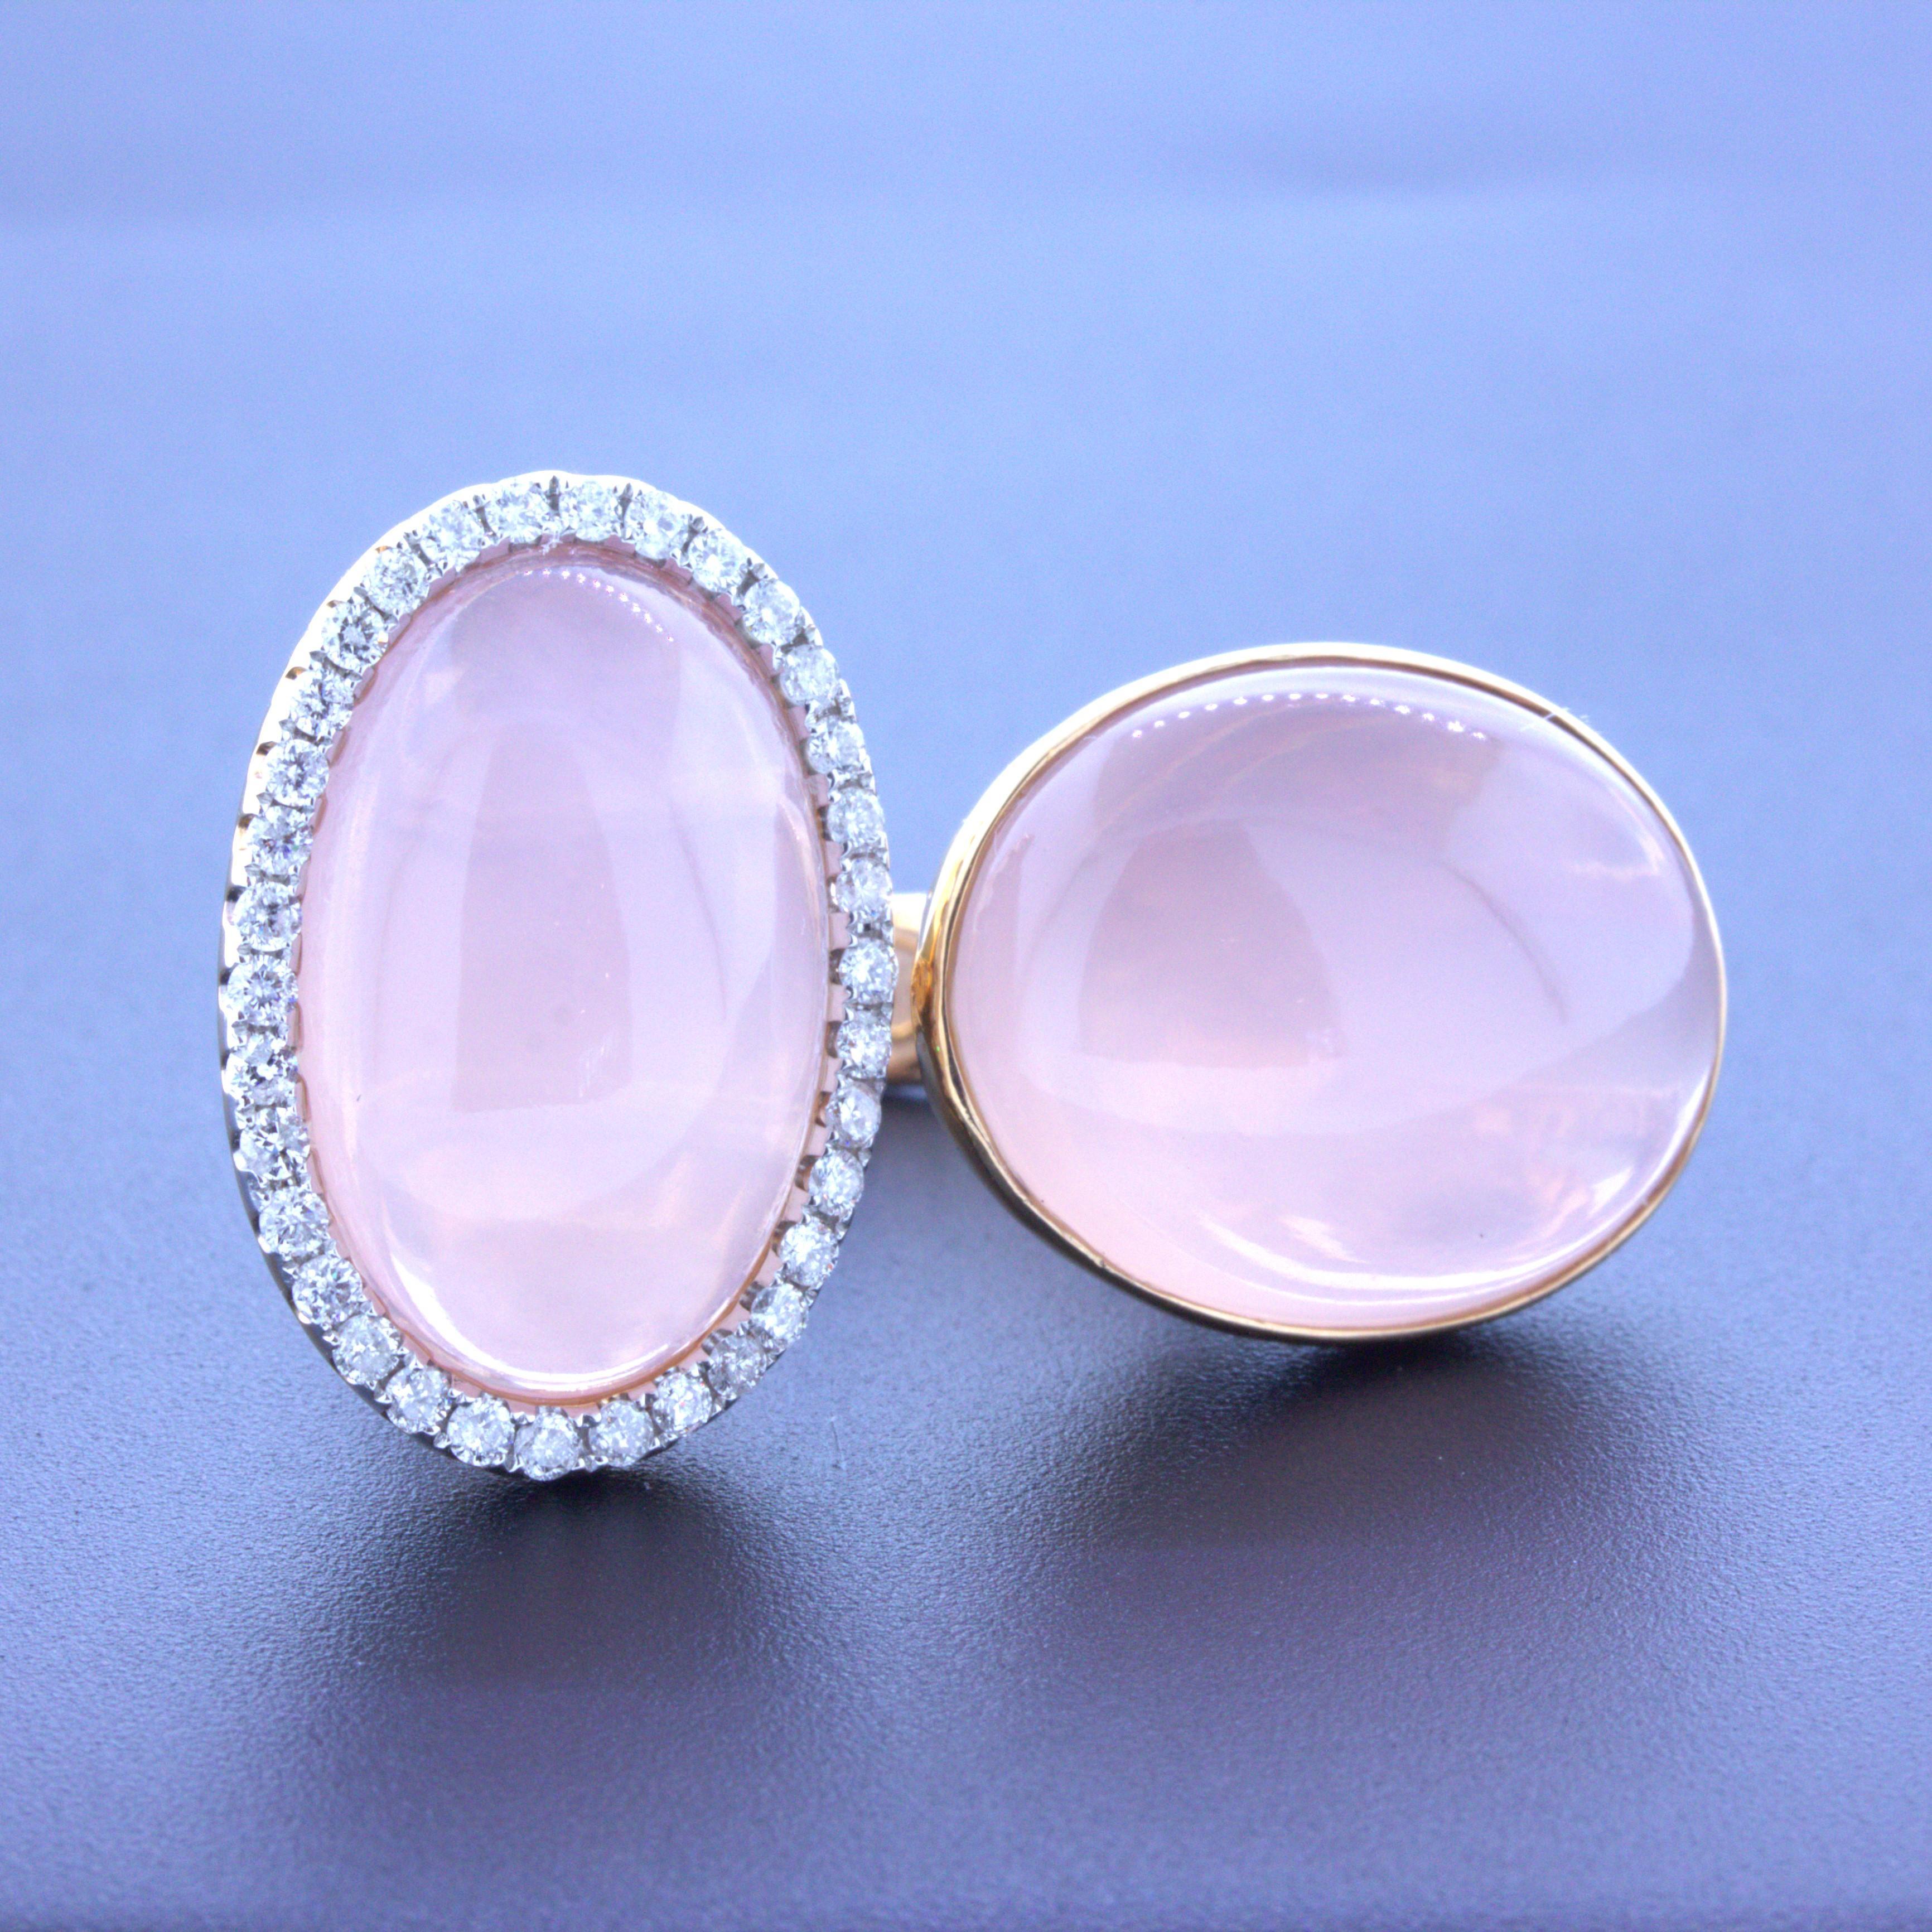 A fun and stylish rose gold ring featuring two cabochon rose quartz with excellent transparency and color. Usually rose quartz is opaque without much light penetrating the stone making them appear dull but these two stones are transparent and glow